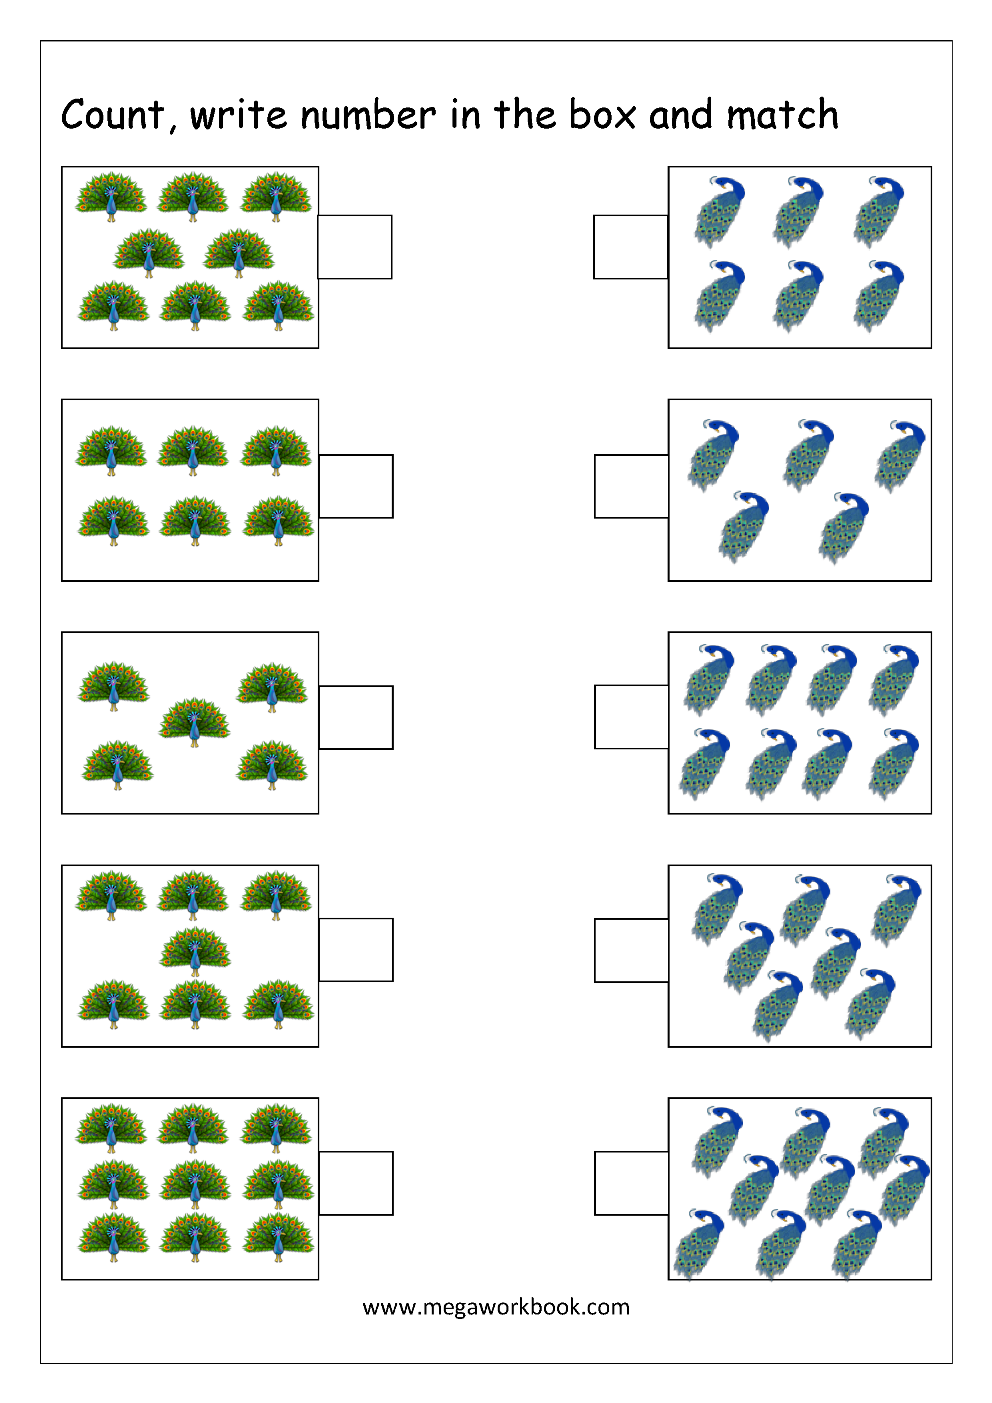 free-printable-number-matching-worksheets-for-kindergarten-and-preschool-count-and-match-1-10